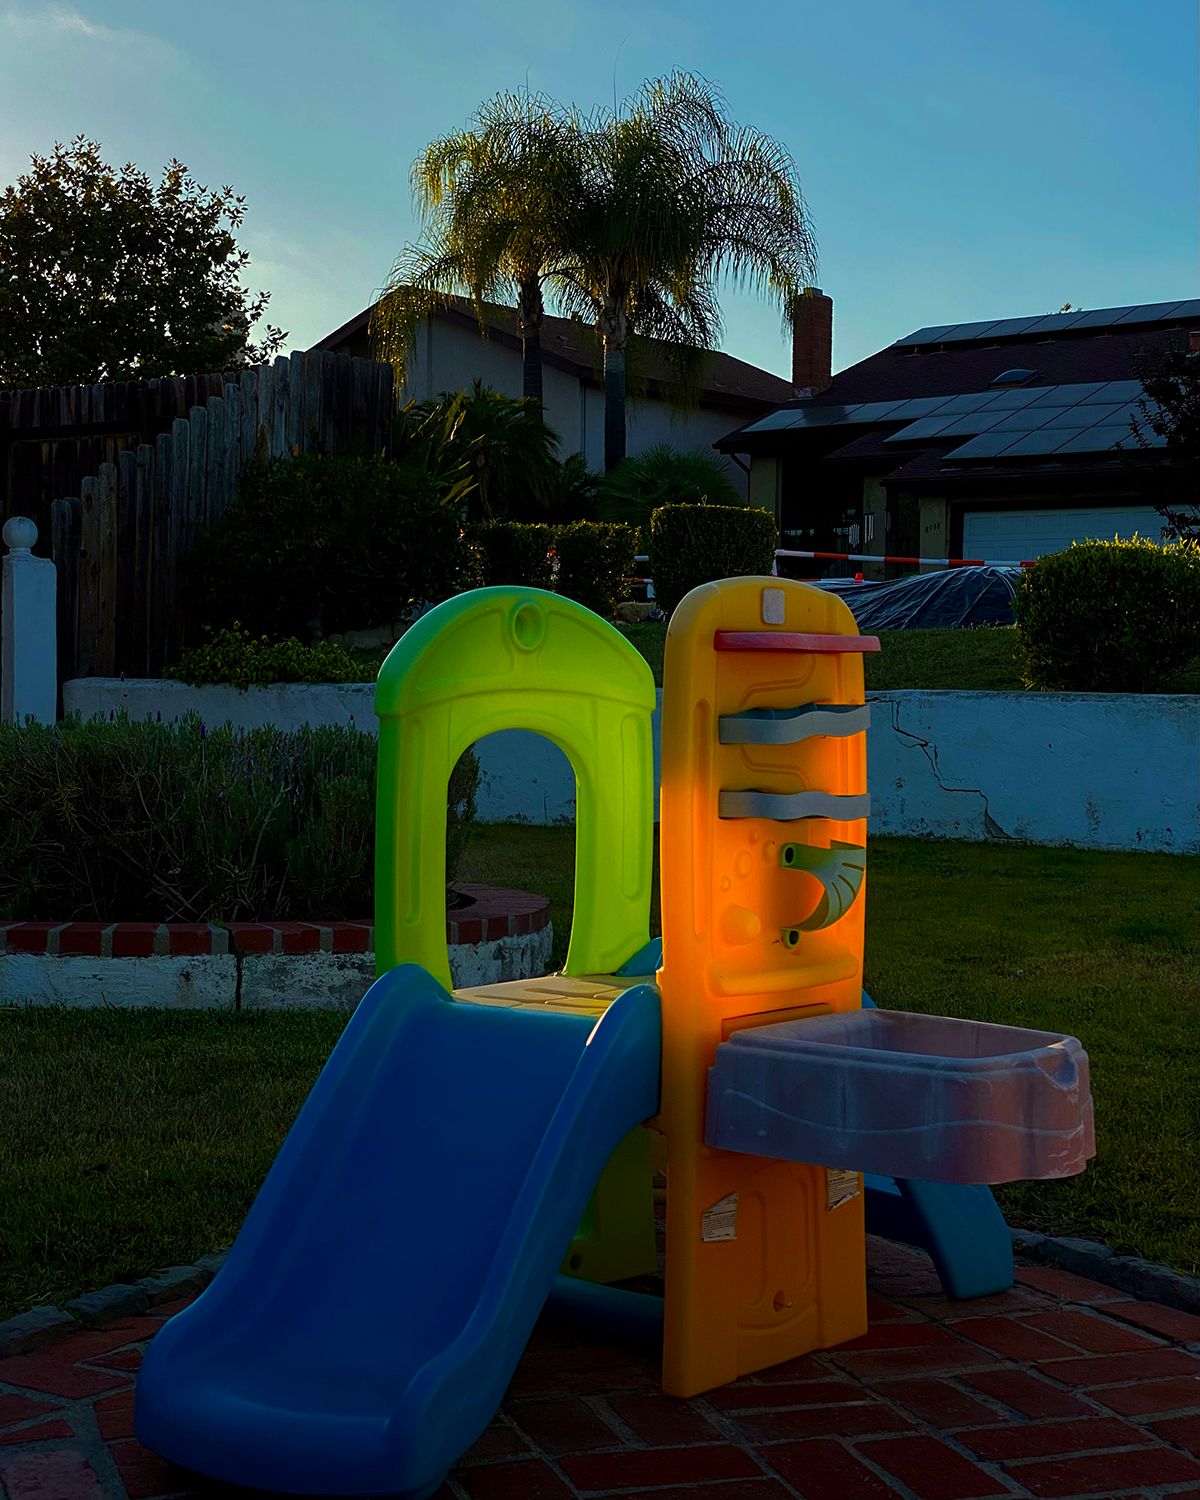 A spot of evening sun shining through a plastic toddler slide, making it appear to glow.